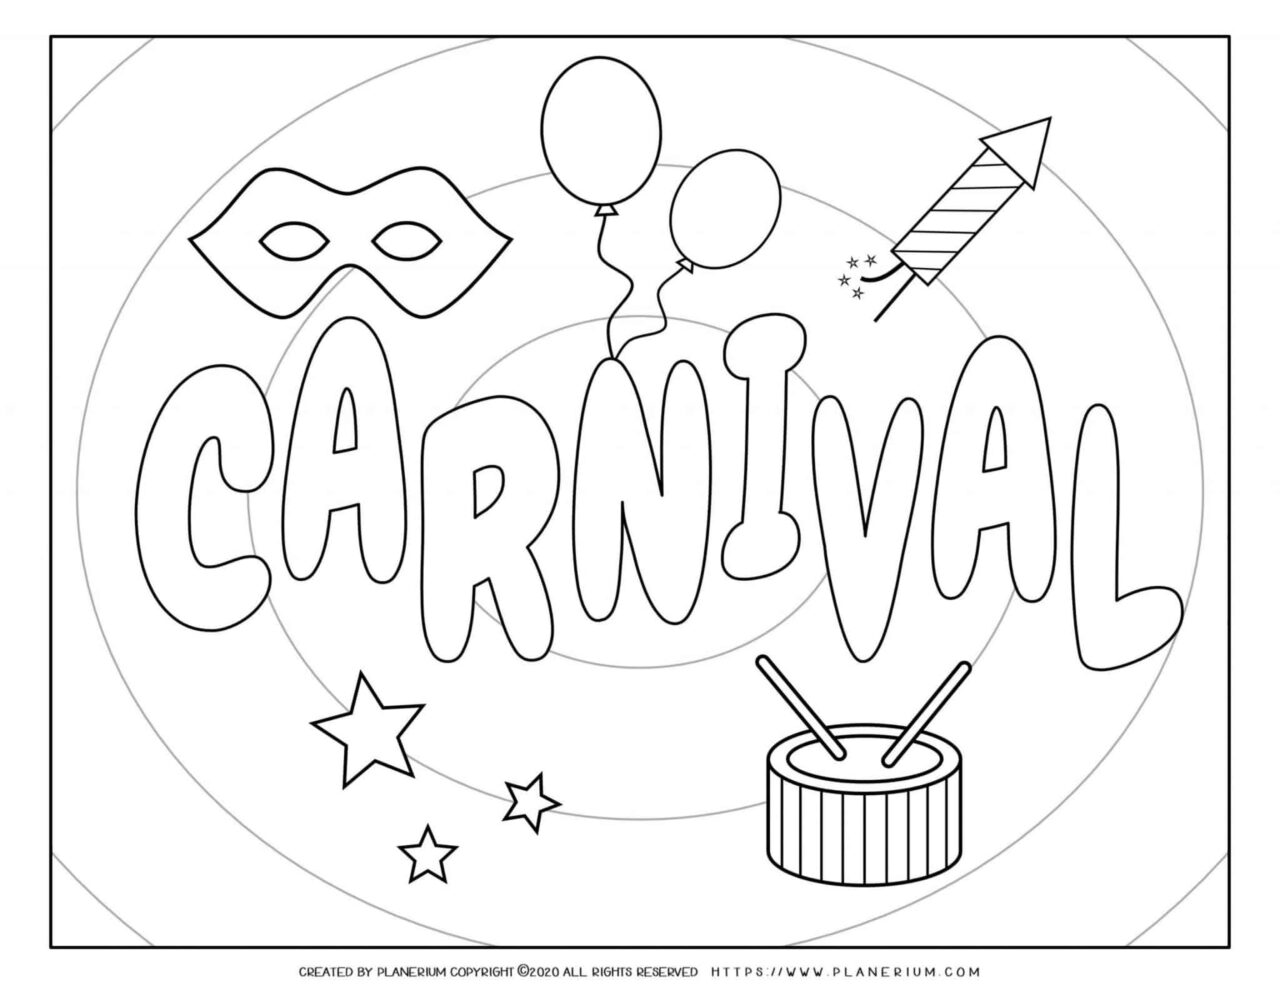 Carnival - Coloring Page Worksheet - Carnival Poster | Planerium